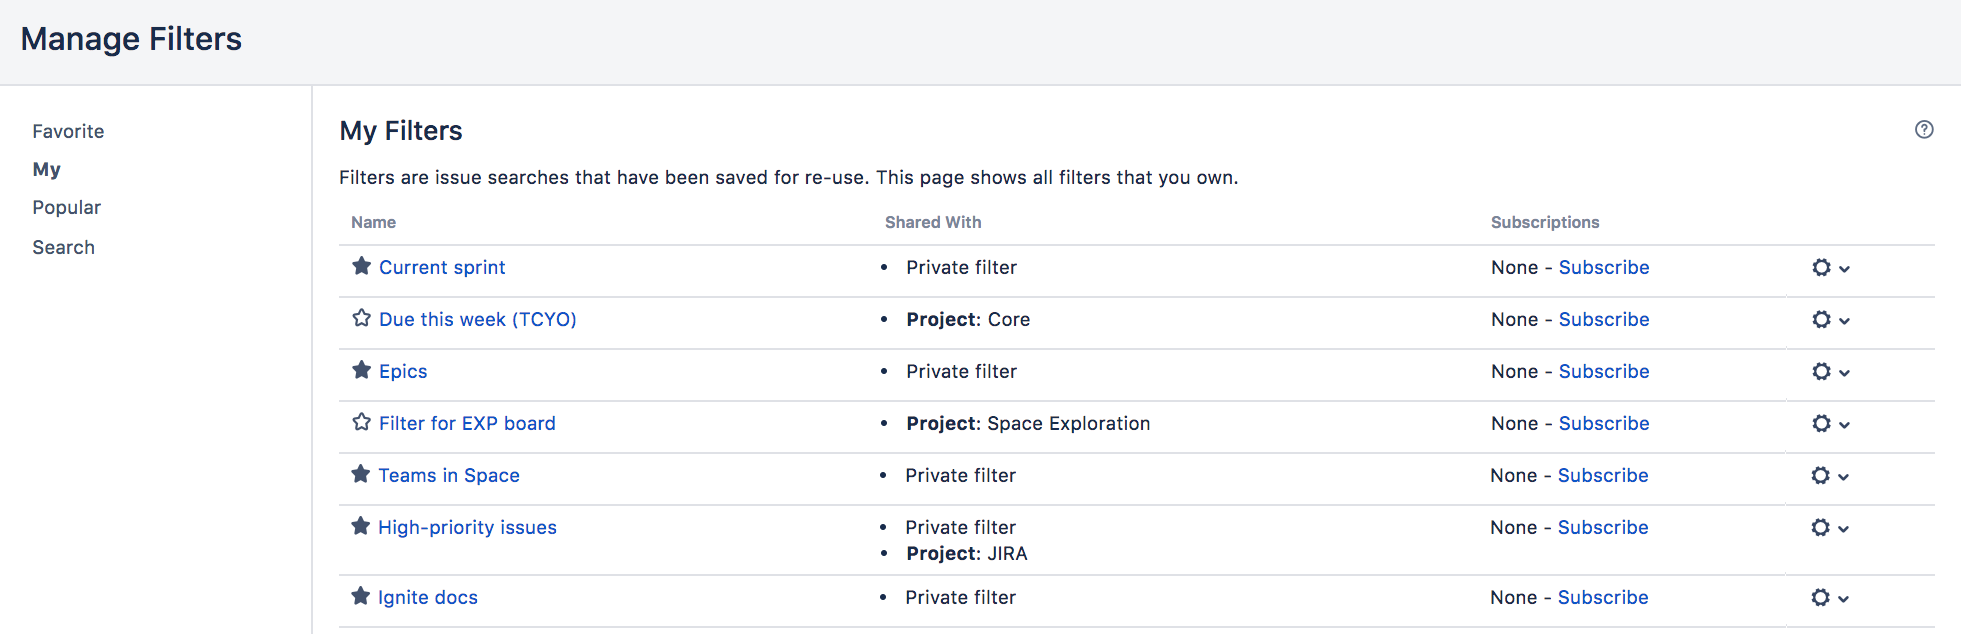 Manage filters page, with a list of saved filters.